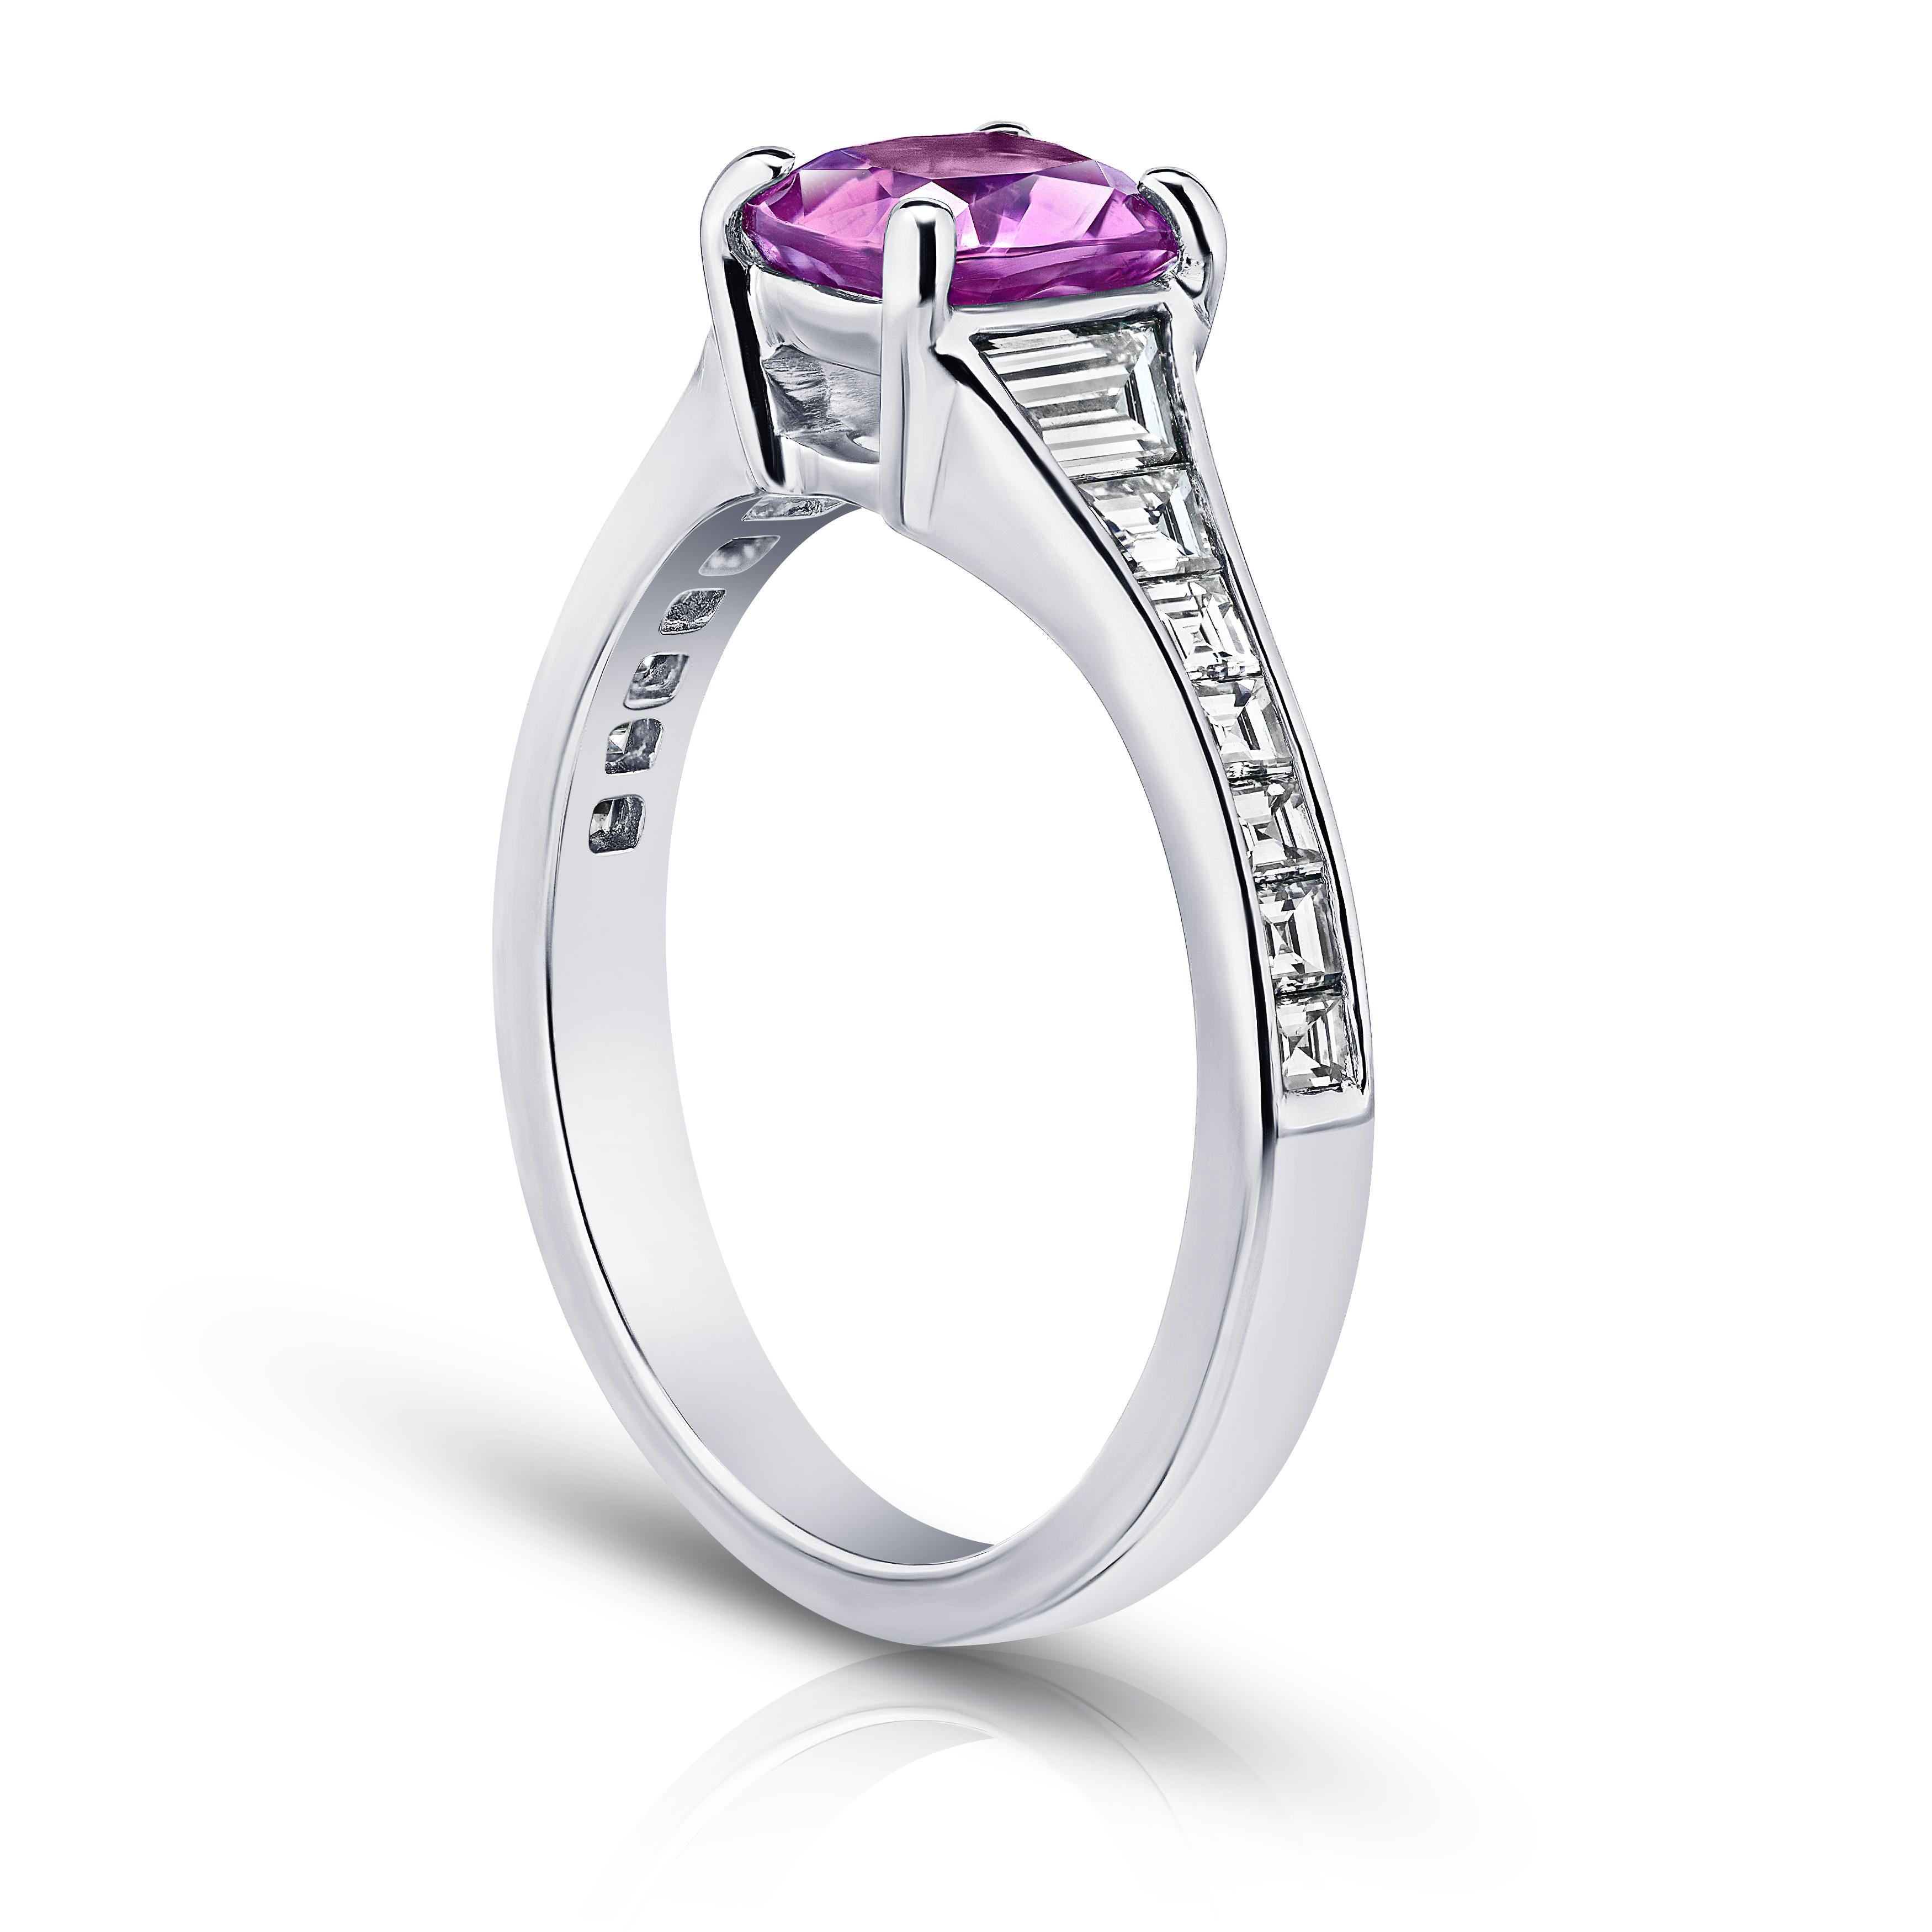 1.38 carat pink cushion sapphire with 14 trapezoid and carre diamonds .84 carats channel set in a platinum ring. 
This ring is currently a size 7.  We will resize to your finger size without charge.
